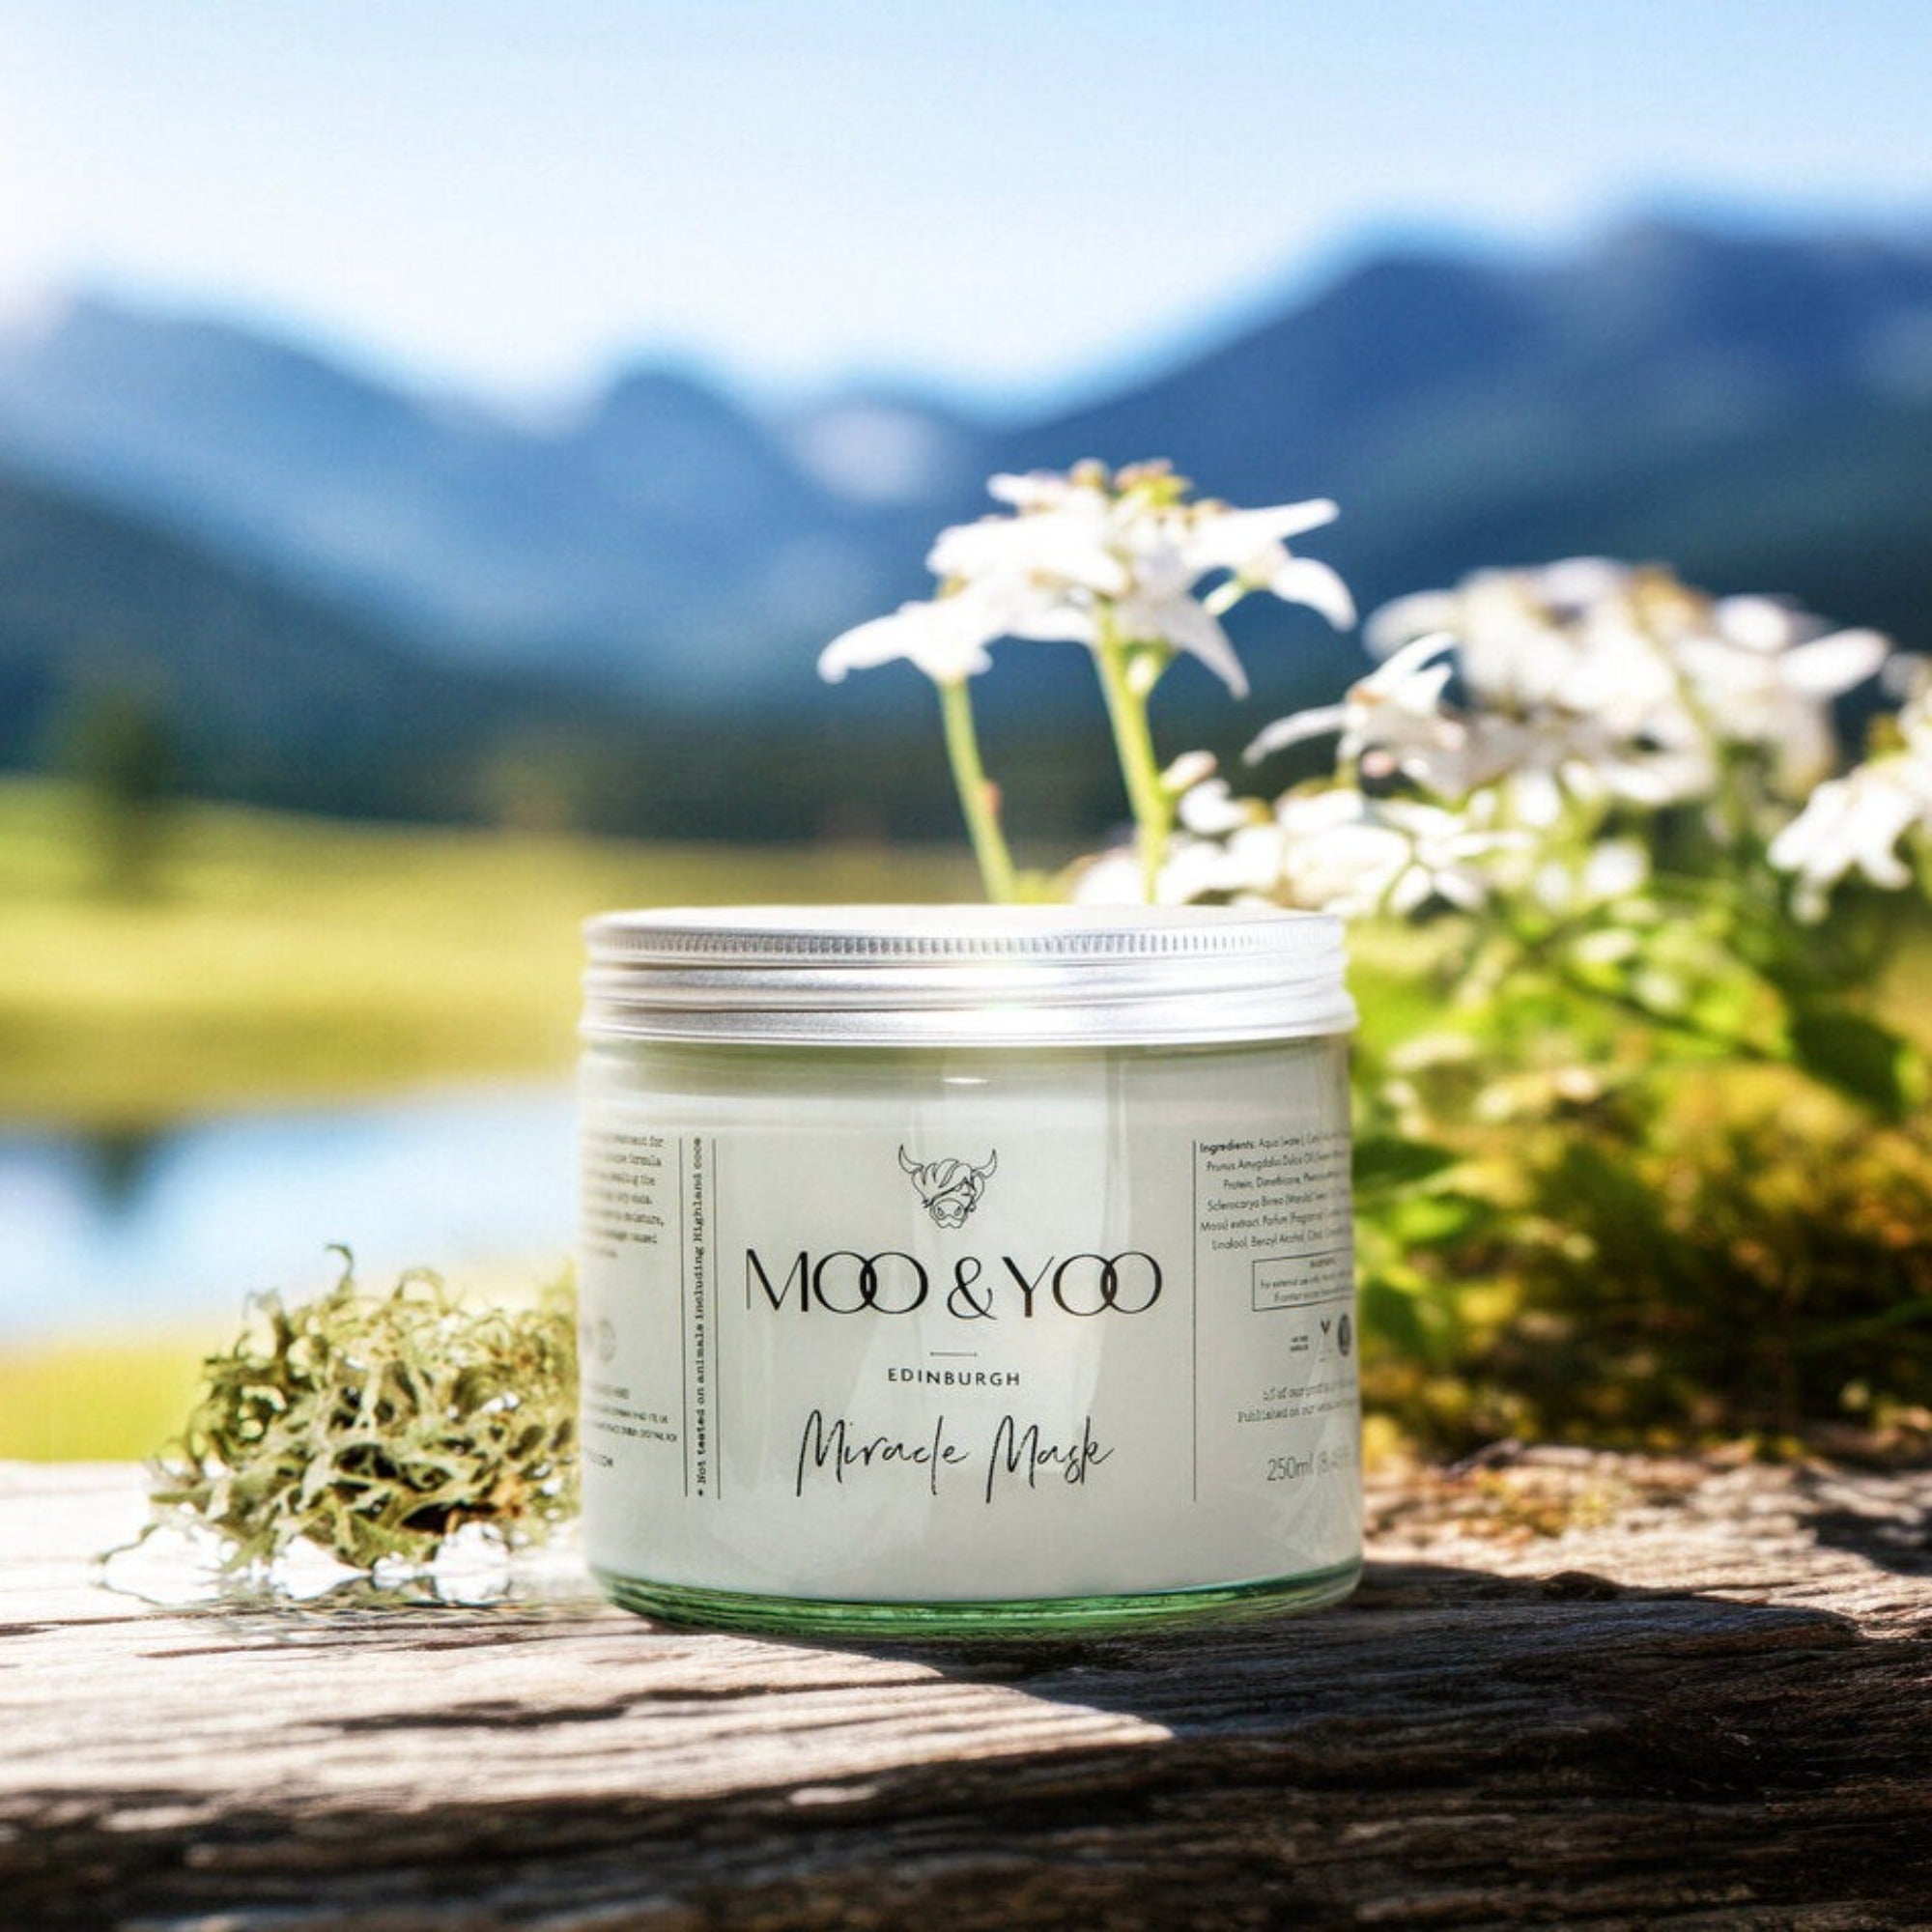 A glass jar of Moo and Yoo Miracle Mask with an aluminium lid. It is placed on a rustic wooden bench overlooking a Scottish Loch and hills.  It is a spring day and there are white spring flowers behind it.